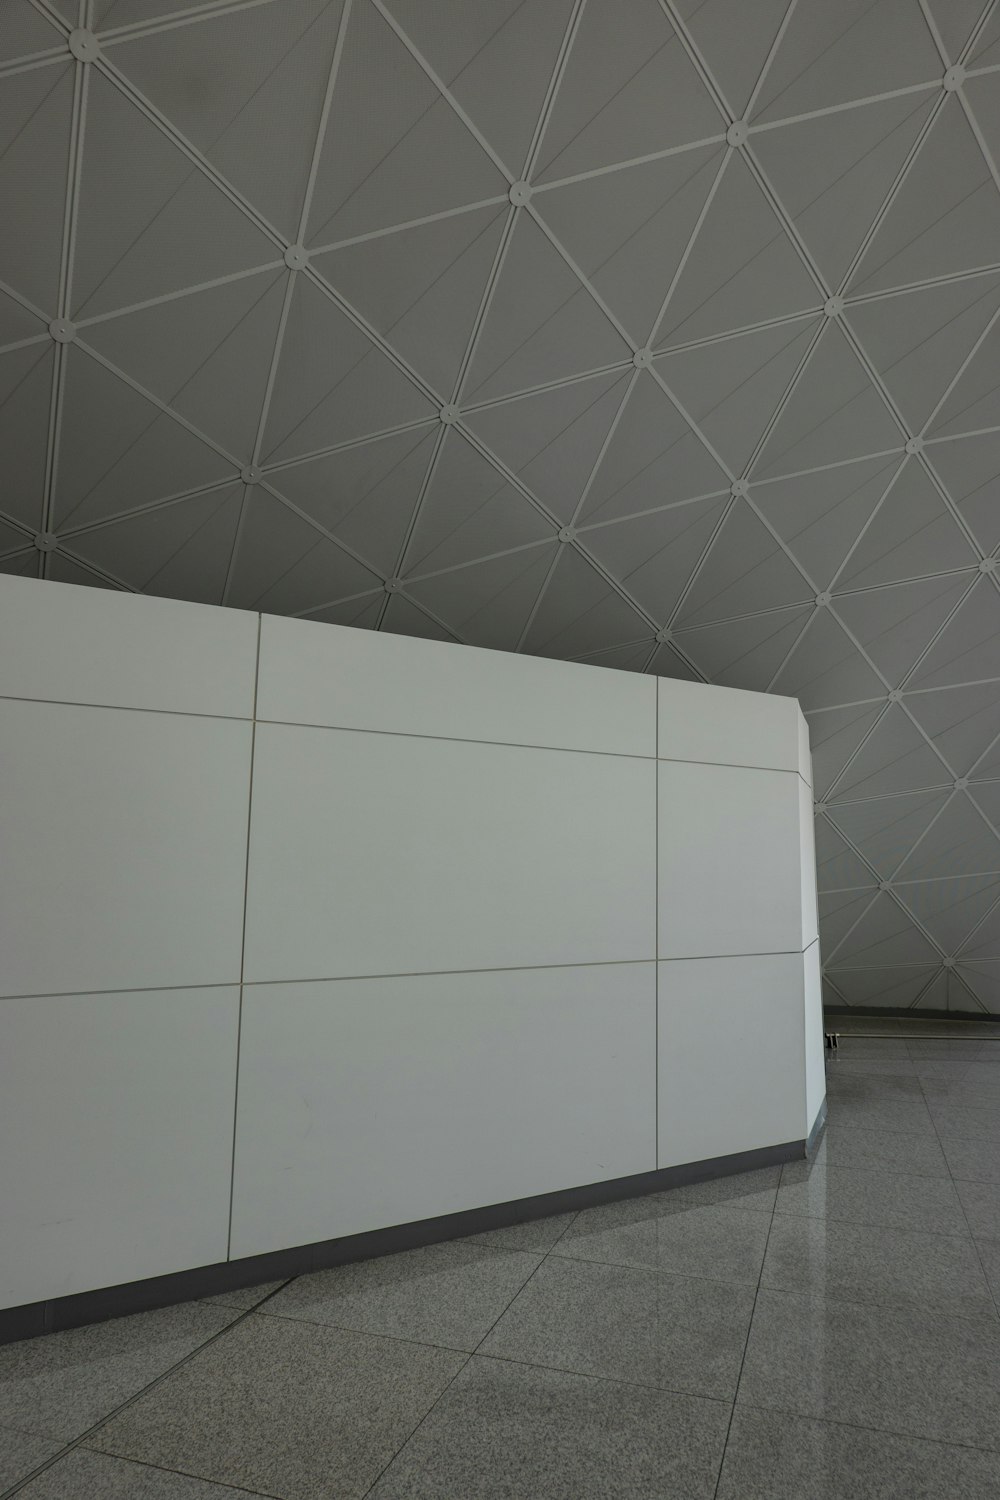 a white tiled wall